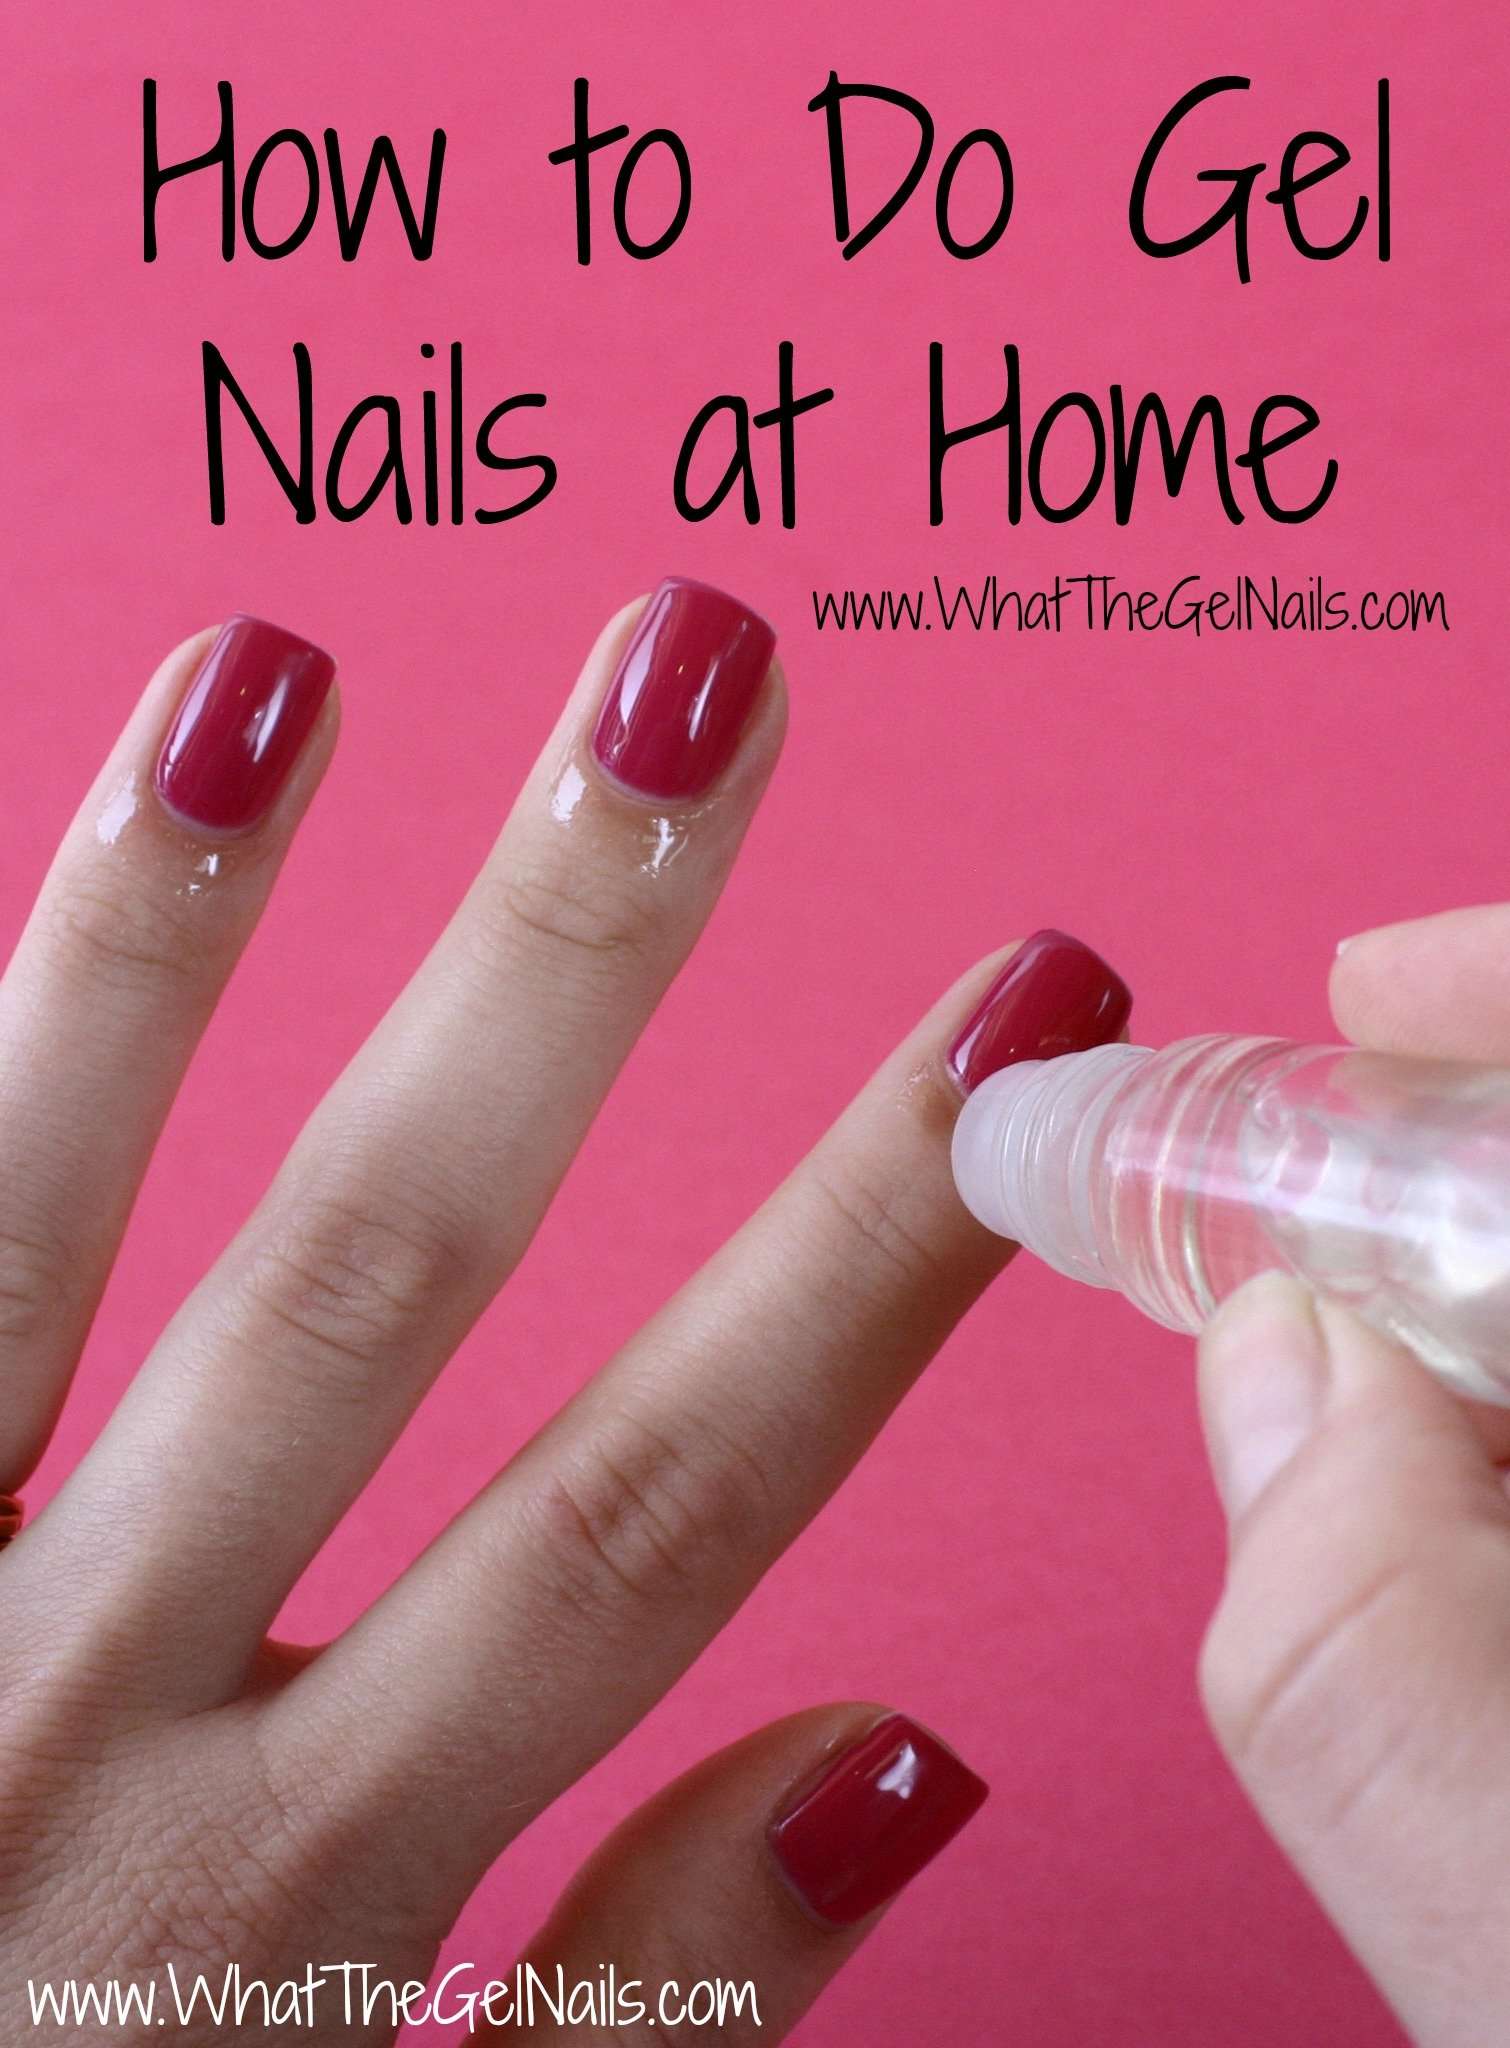 How to Do Gel Nails at Home